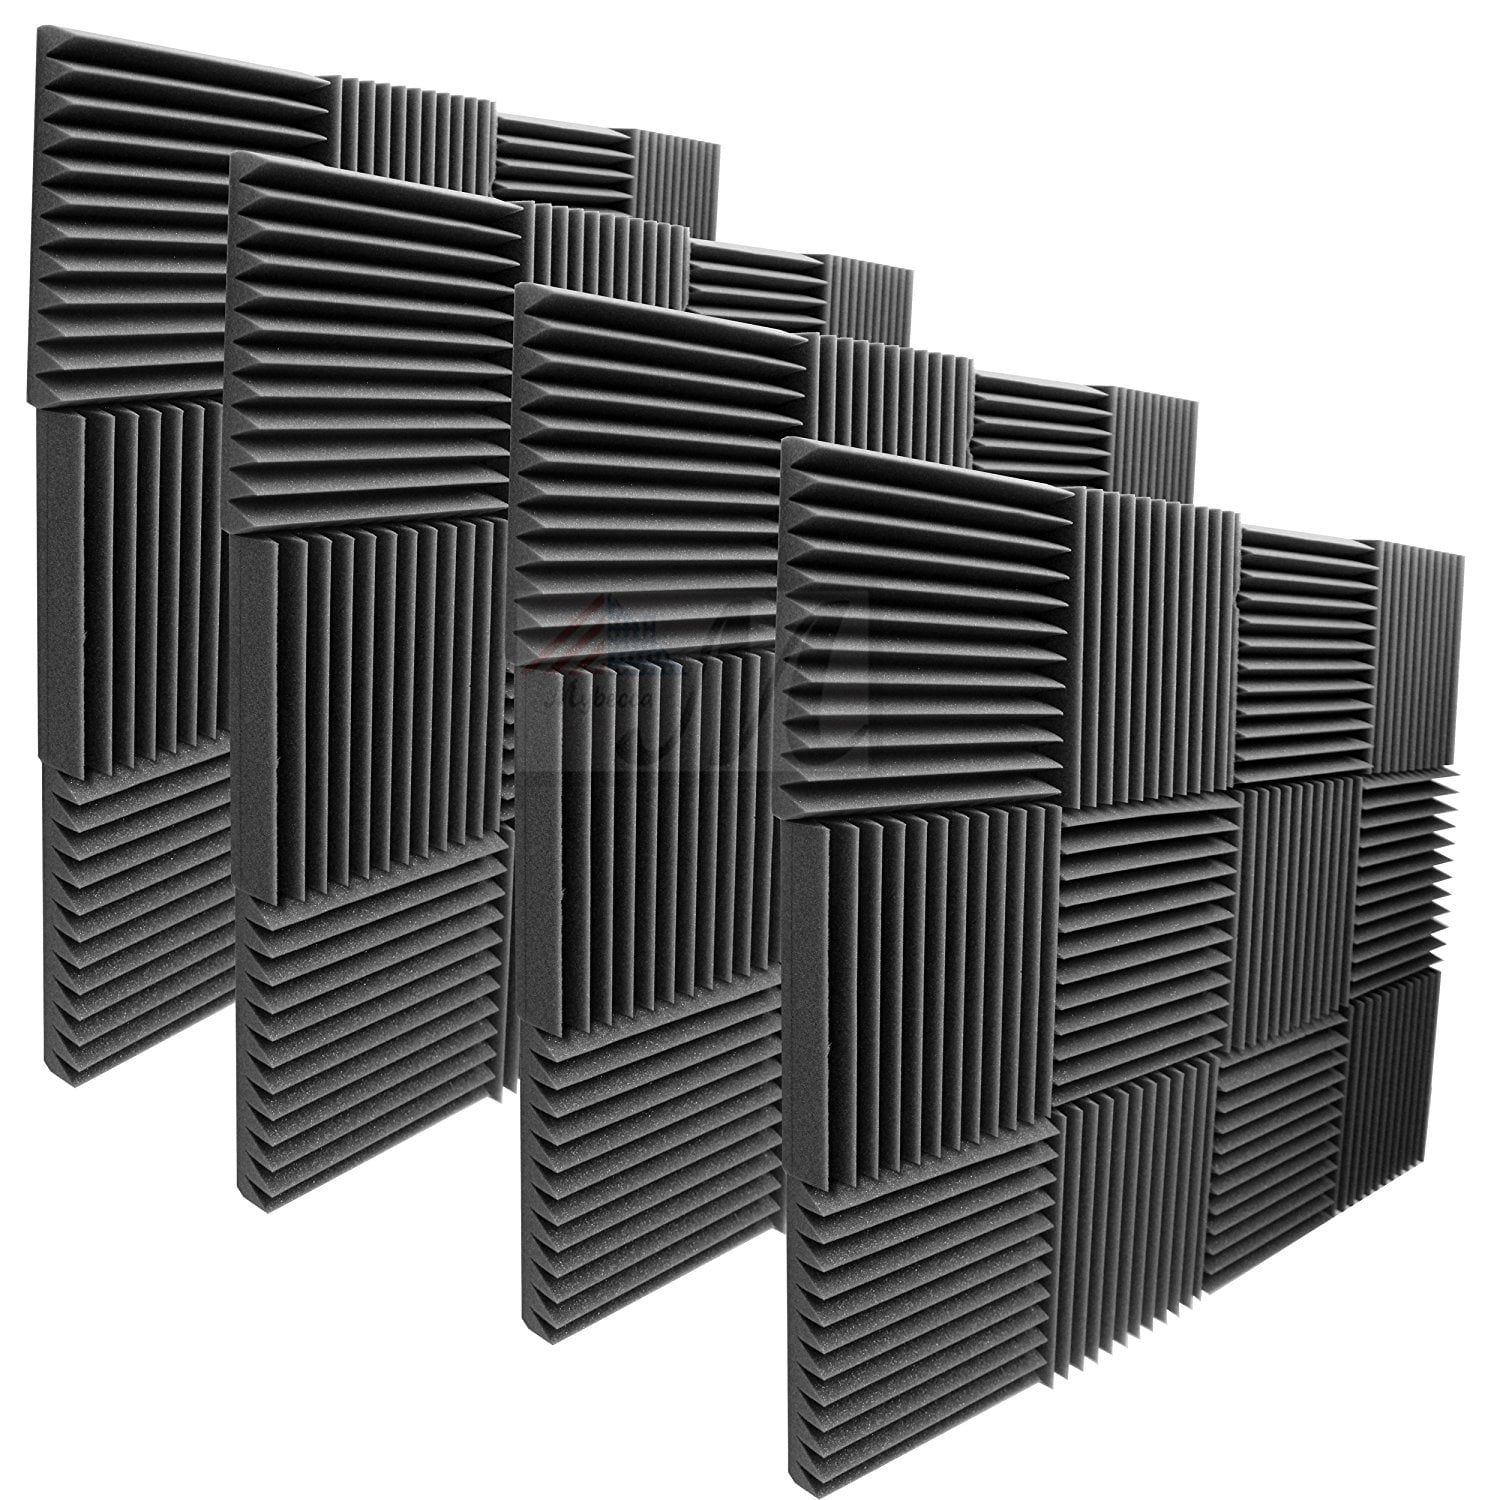 lotmusic 4 Pack Studio Soundproofing Foam Wall Acoustic Panels Padding Tiles 2 X 12 X 12 for Sound Proof Youtube Recording Equipment Room